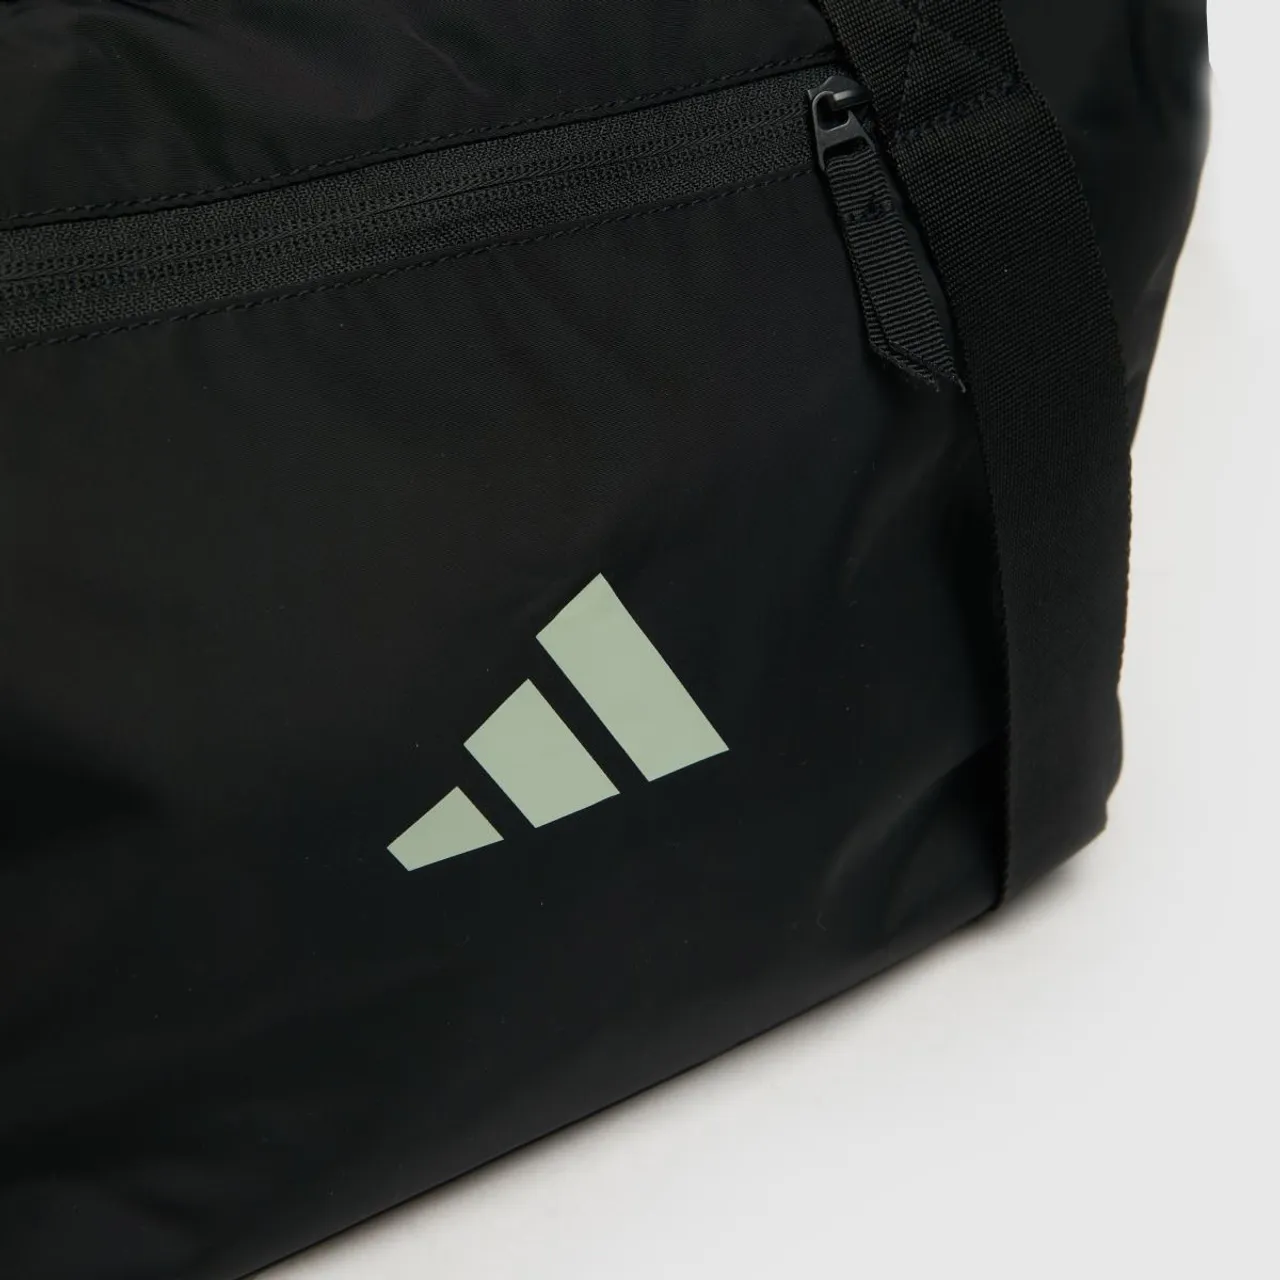 adidas Black and White Sport Bag, Size: 30.5L